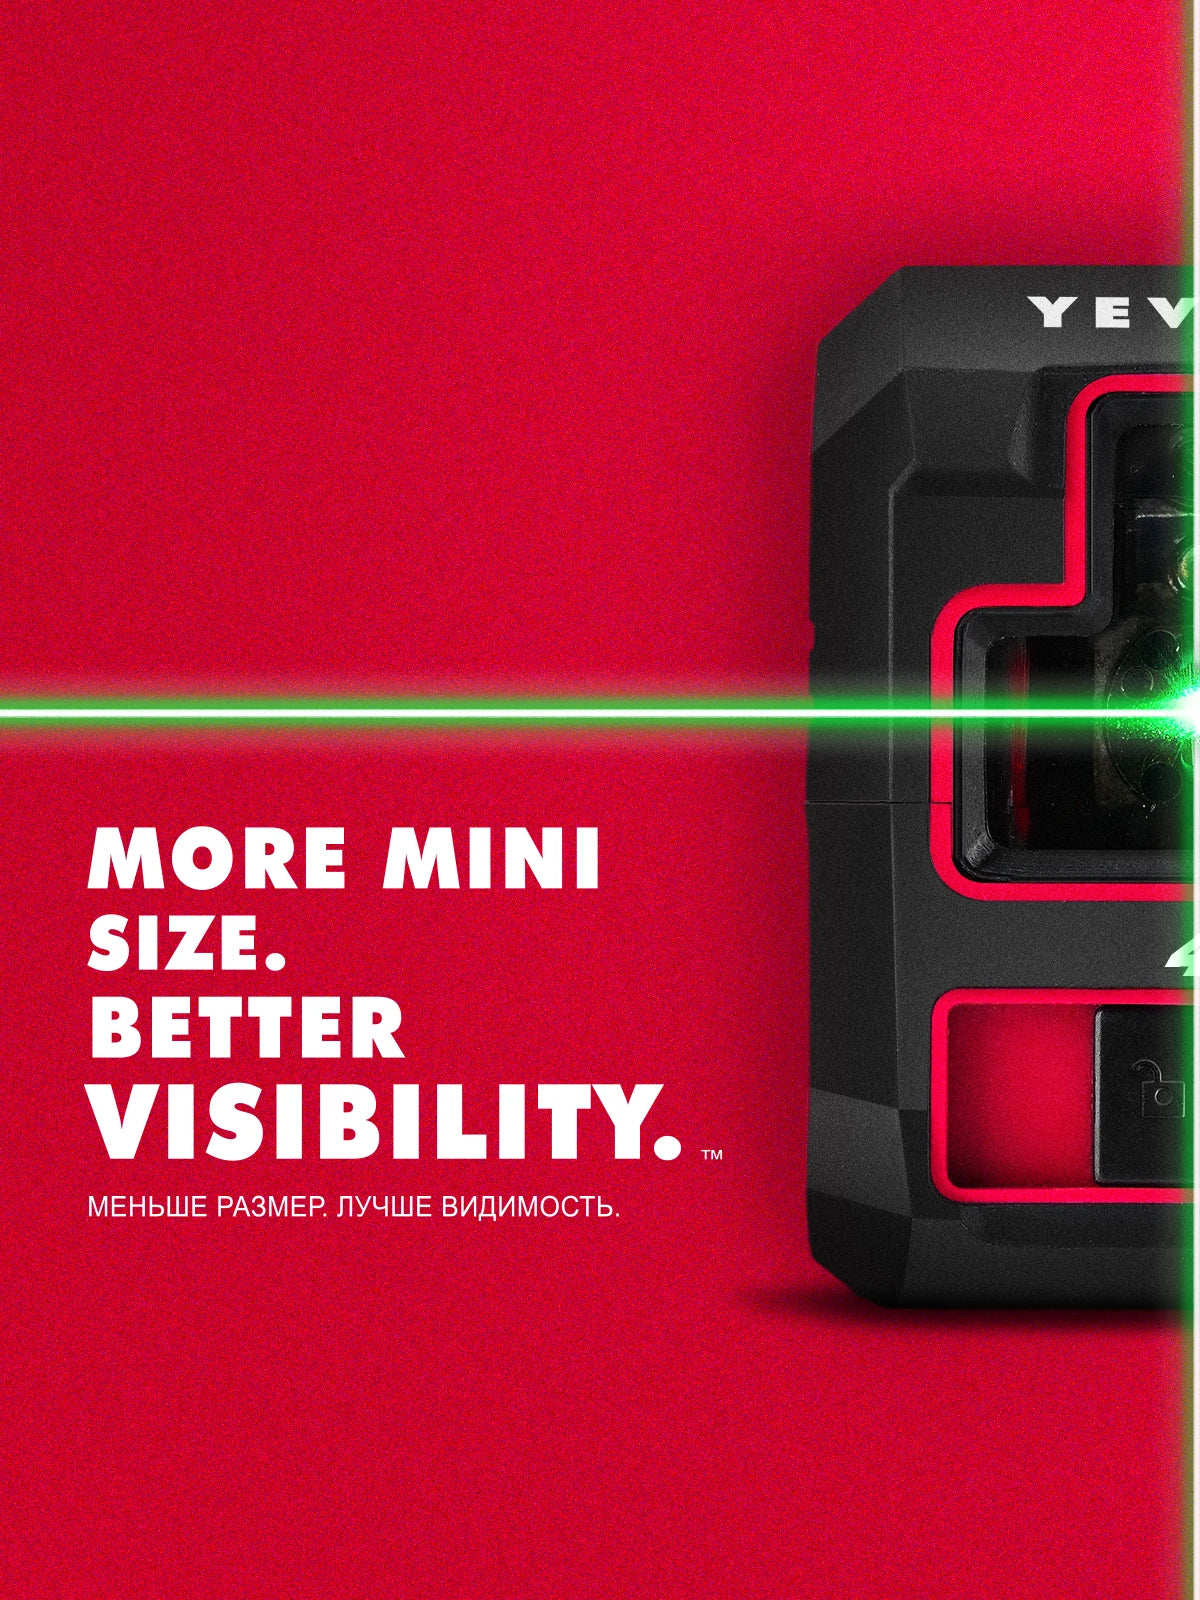 YEVOLT YVGLL4XS2B1 Green 2-Line Cross Line Laser Level with Magnetic Mount High Visibility Self-Leveling Indoor&Outdoor Tools